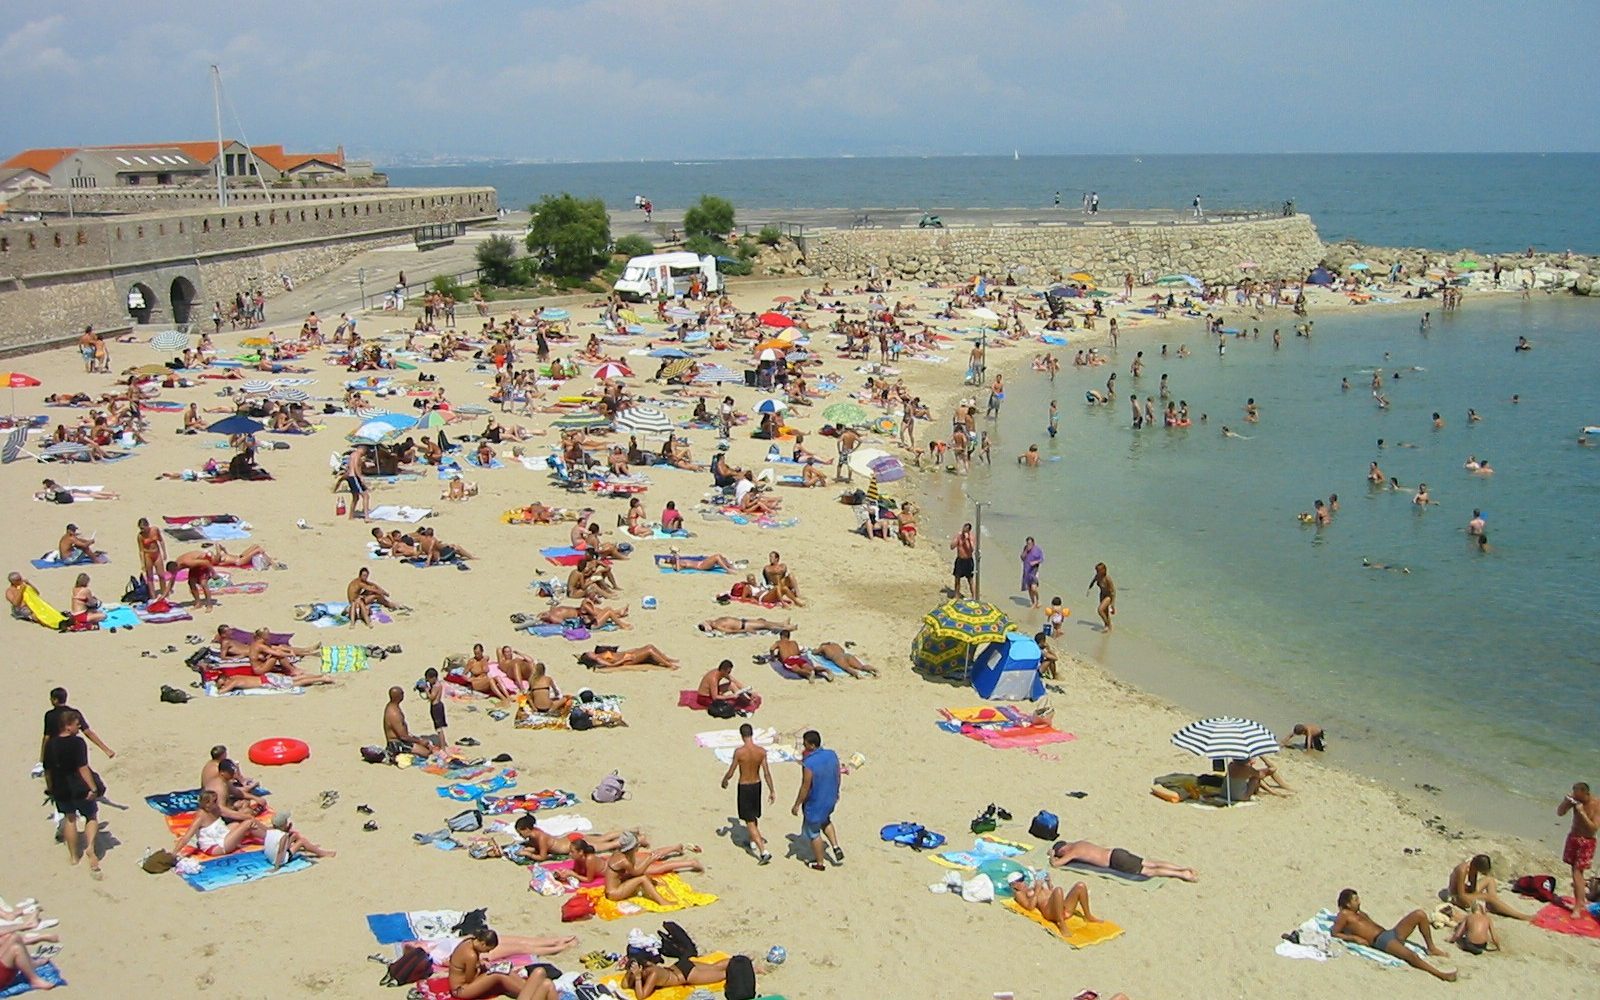 europe’s most polluted beaches – where swimming comes with a health warning